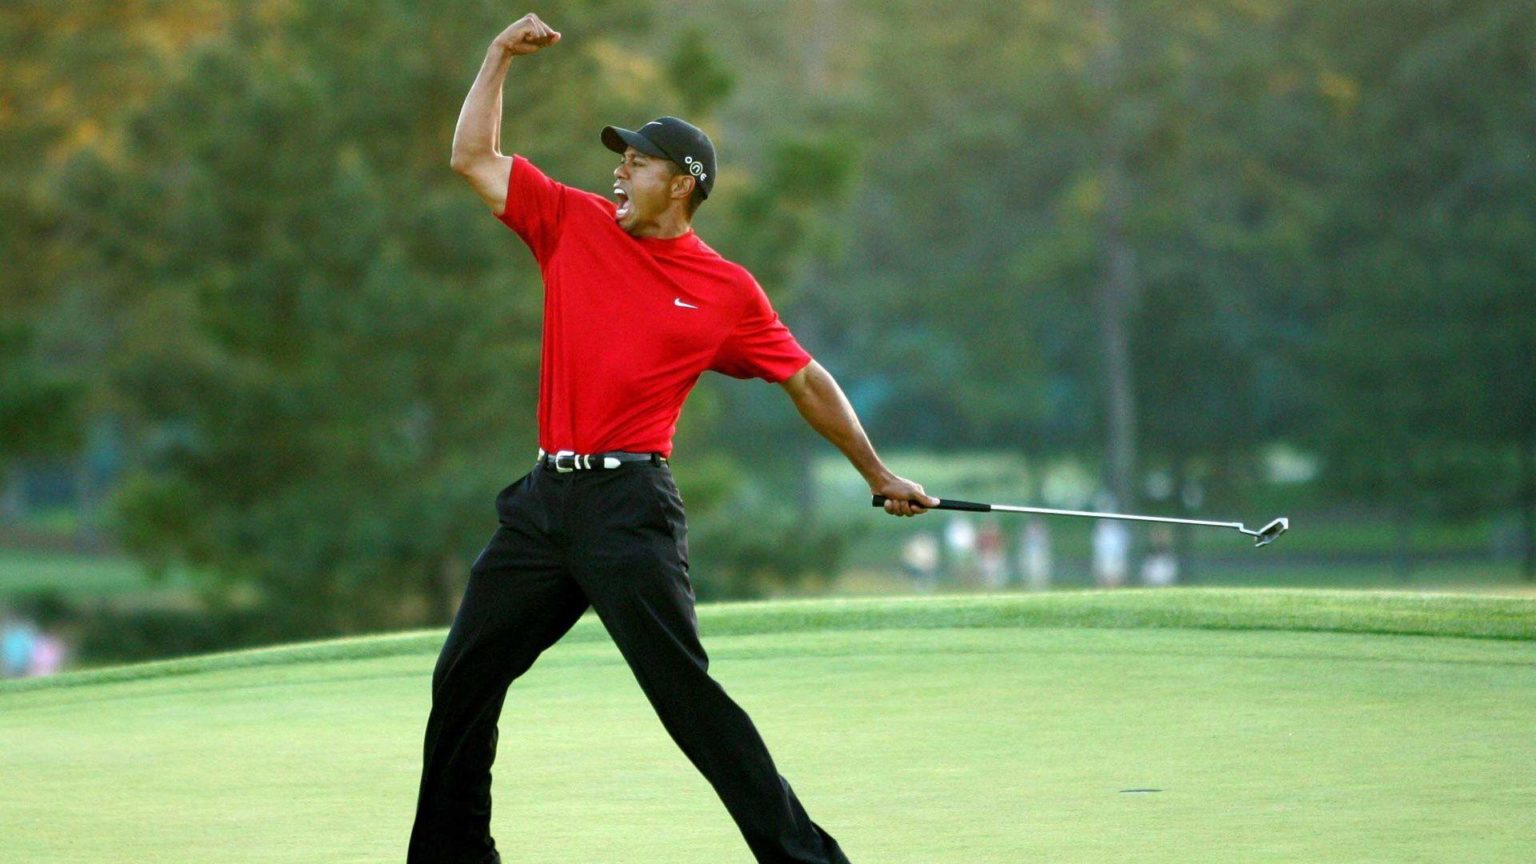 Tiger Woods Wallpaper, Awesome Tiger Woods Wallpaper, #36072